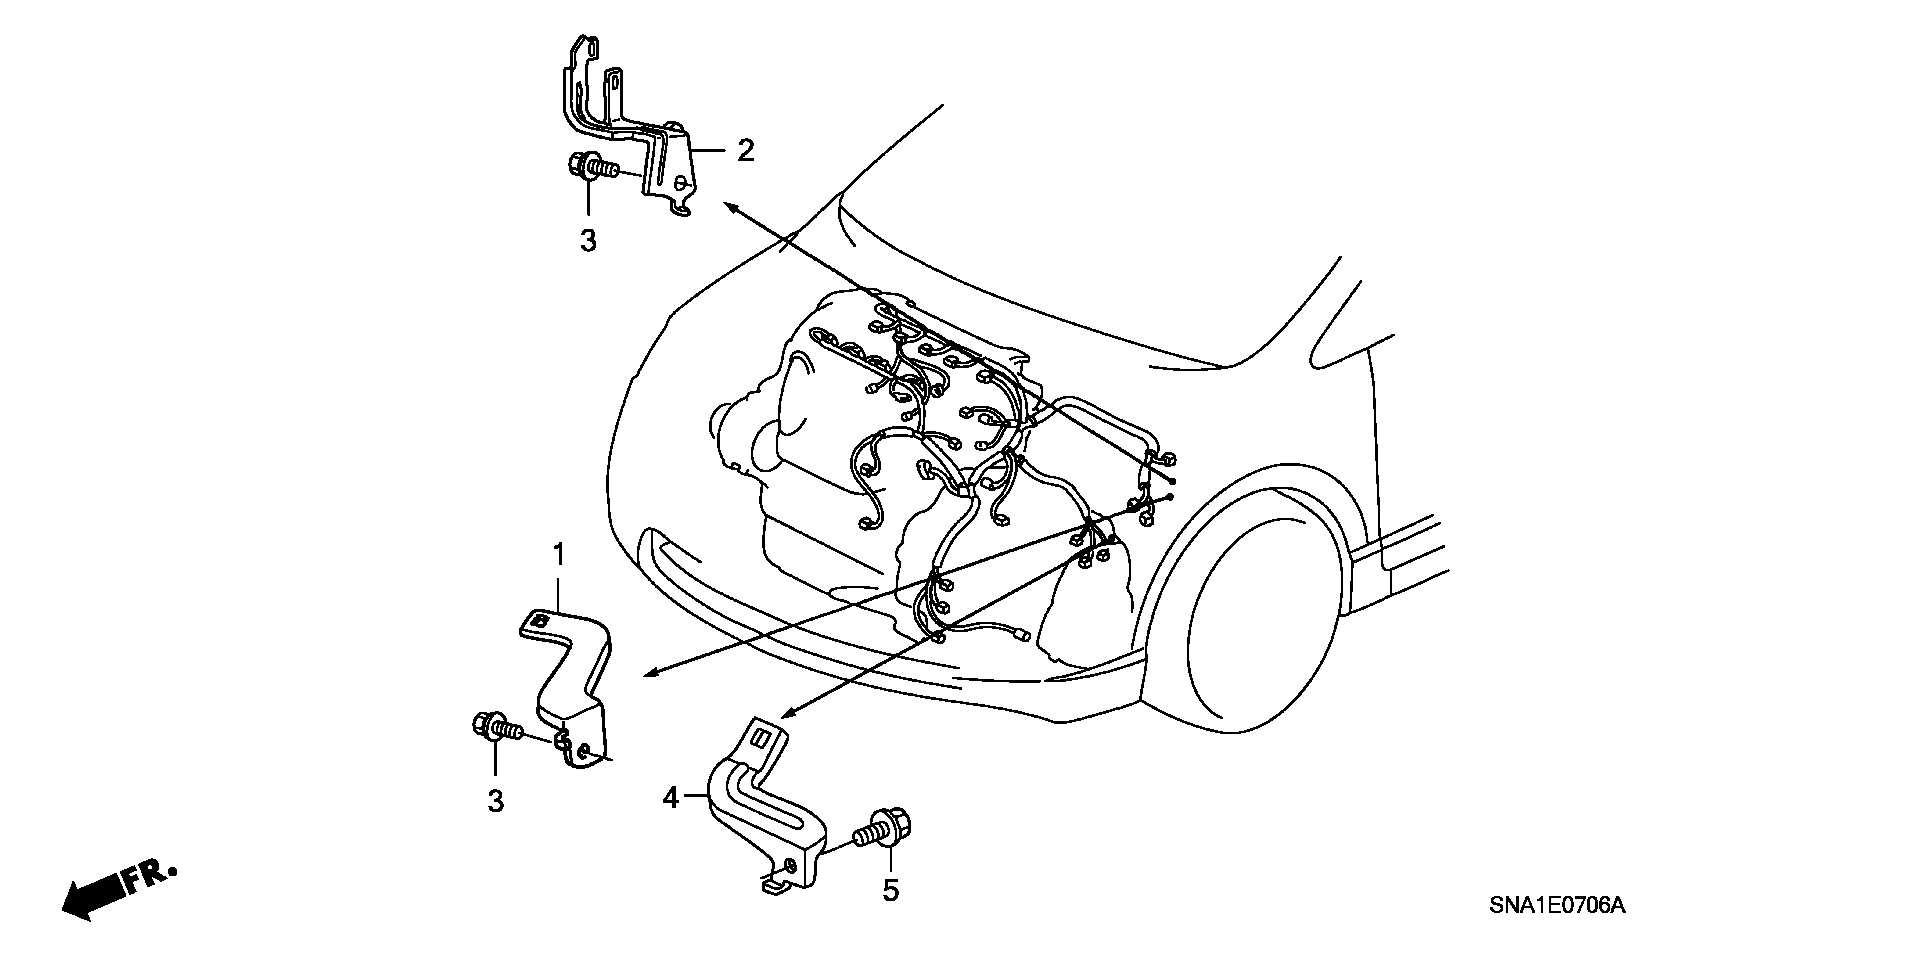 ENGINE WIRE HARNESS STAY(2.0L)